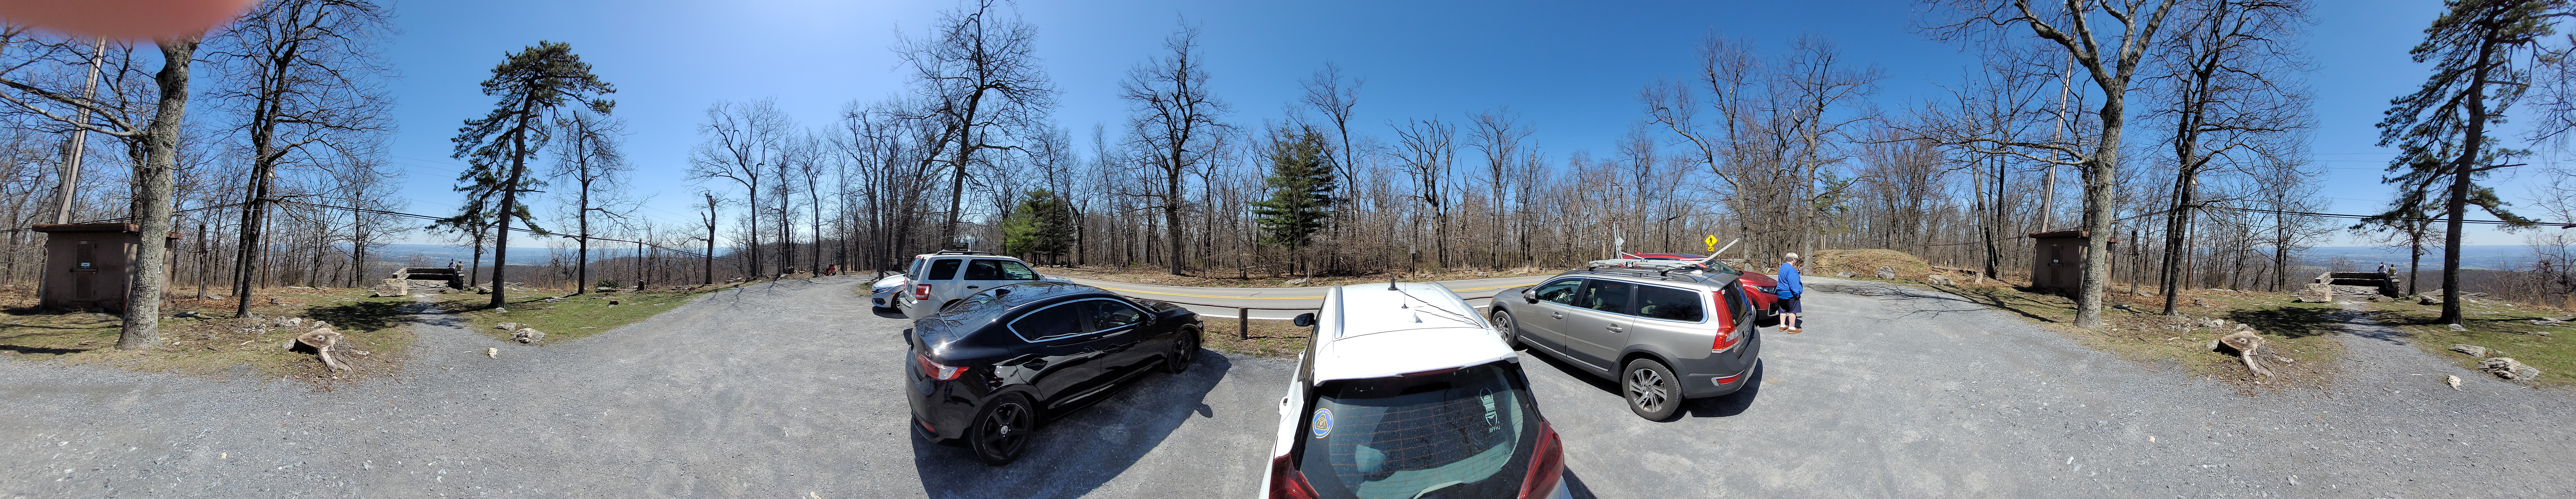 Panoramic image from North Frederick Overlook parking area.